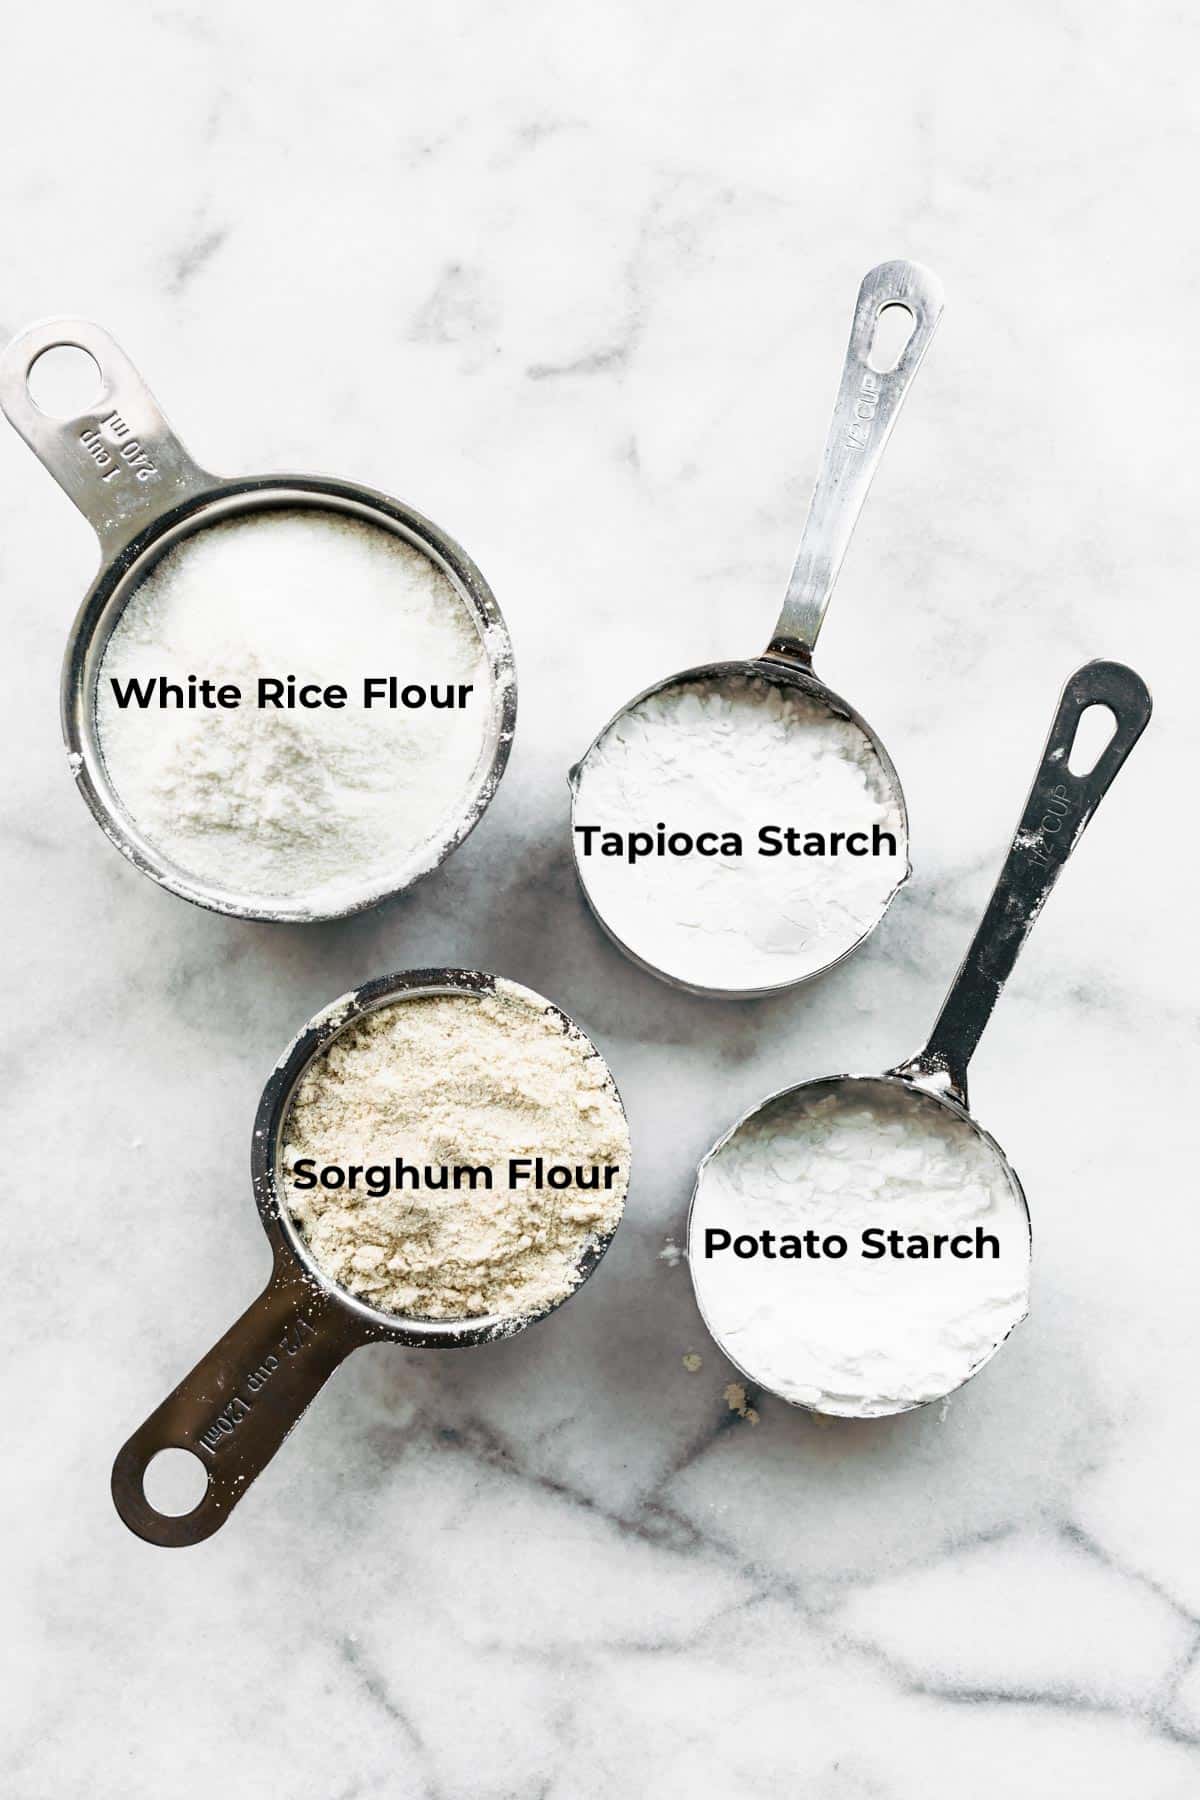 Four measuring cups on a marble countertop filled with different gluten free flours and labeled.